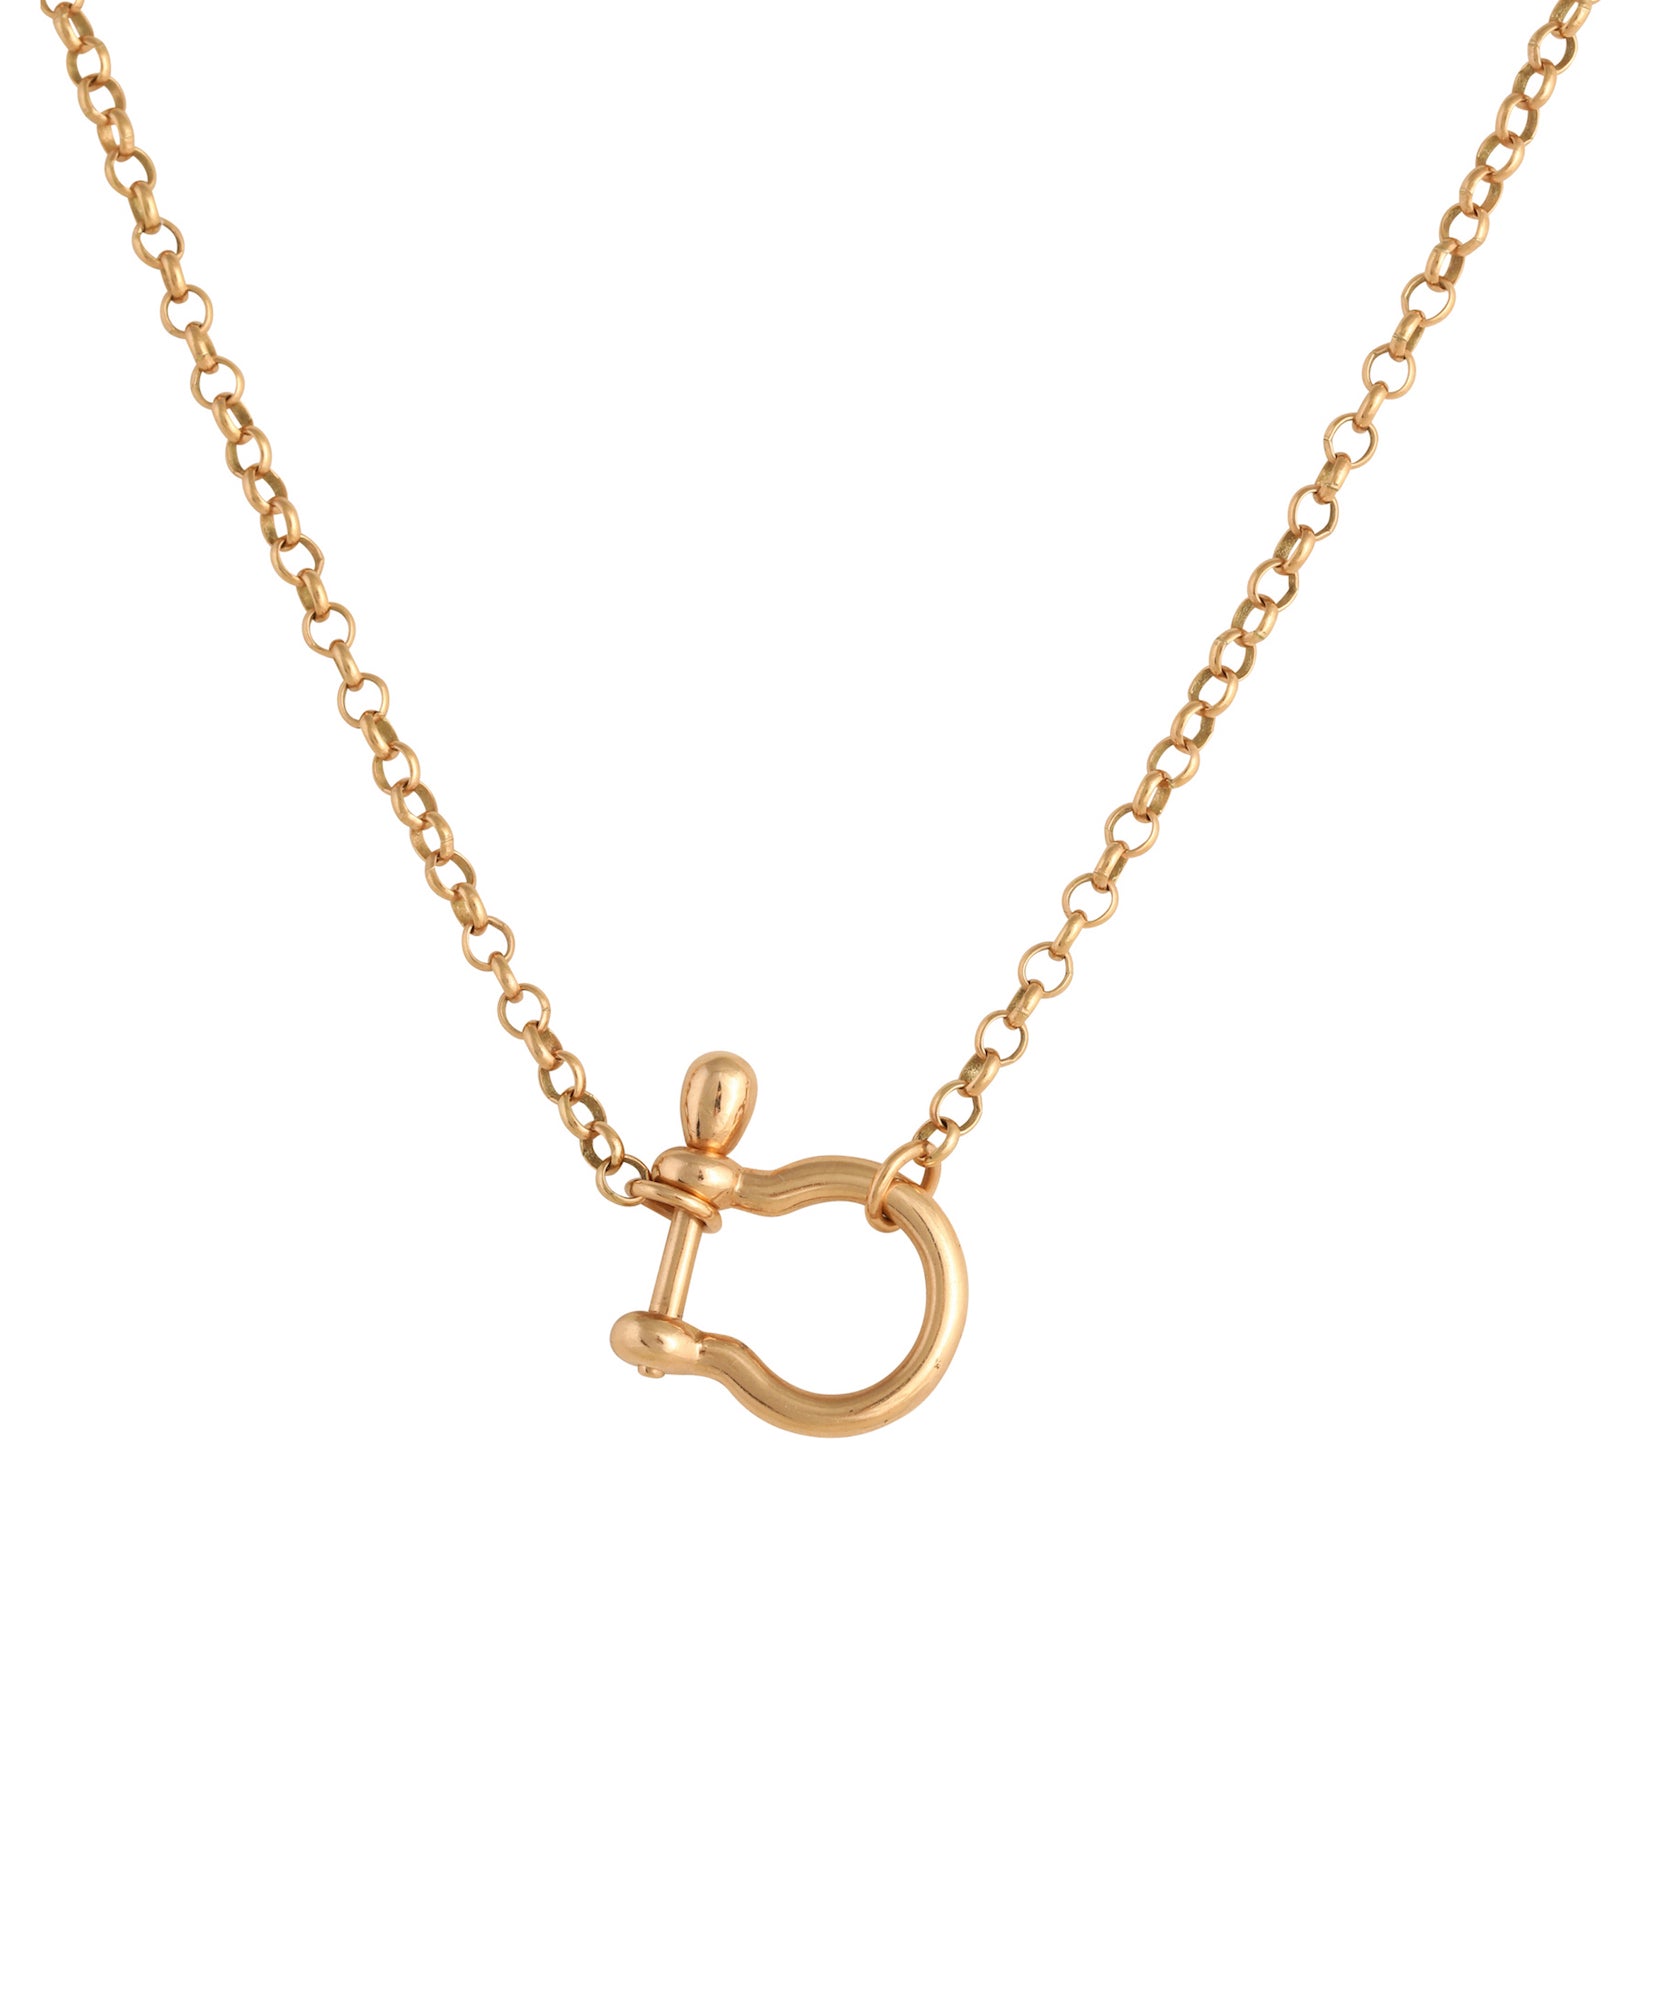 asymmetric, clasp, chain, gold, necklace